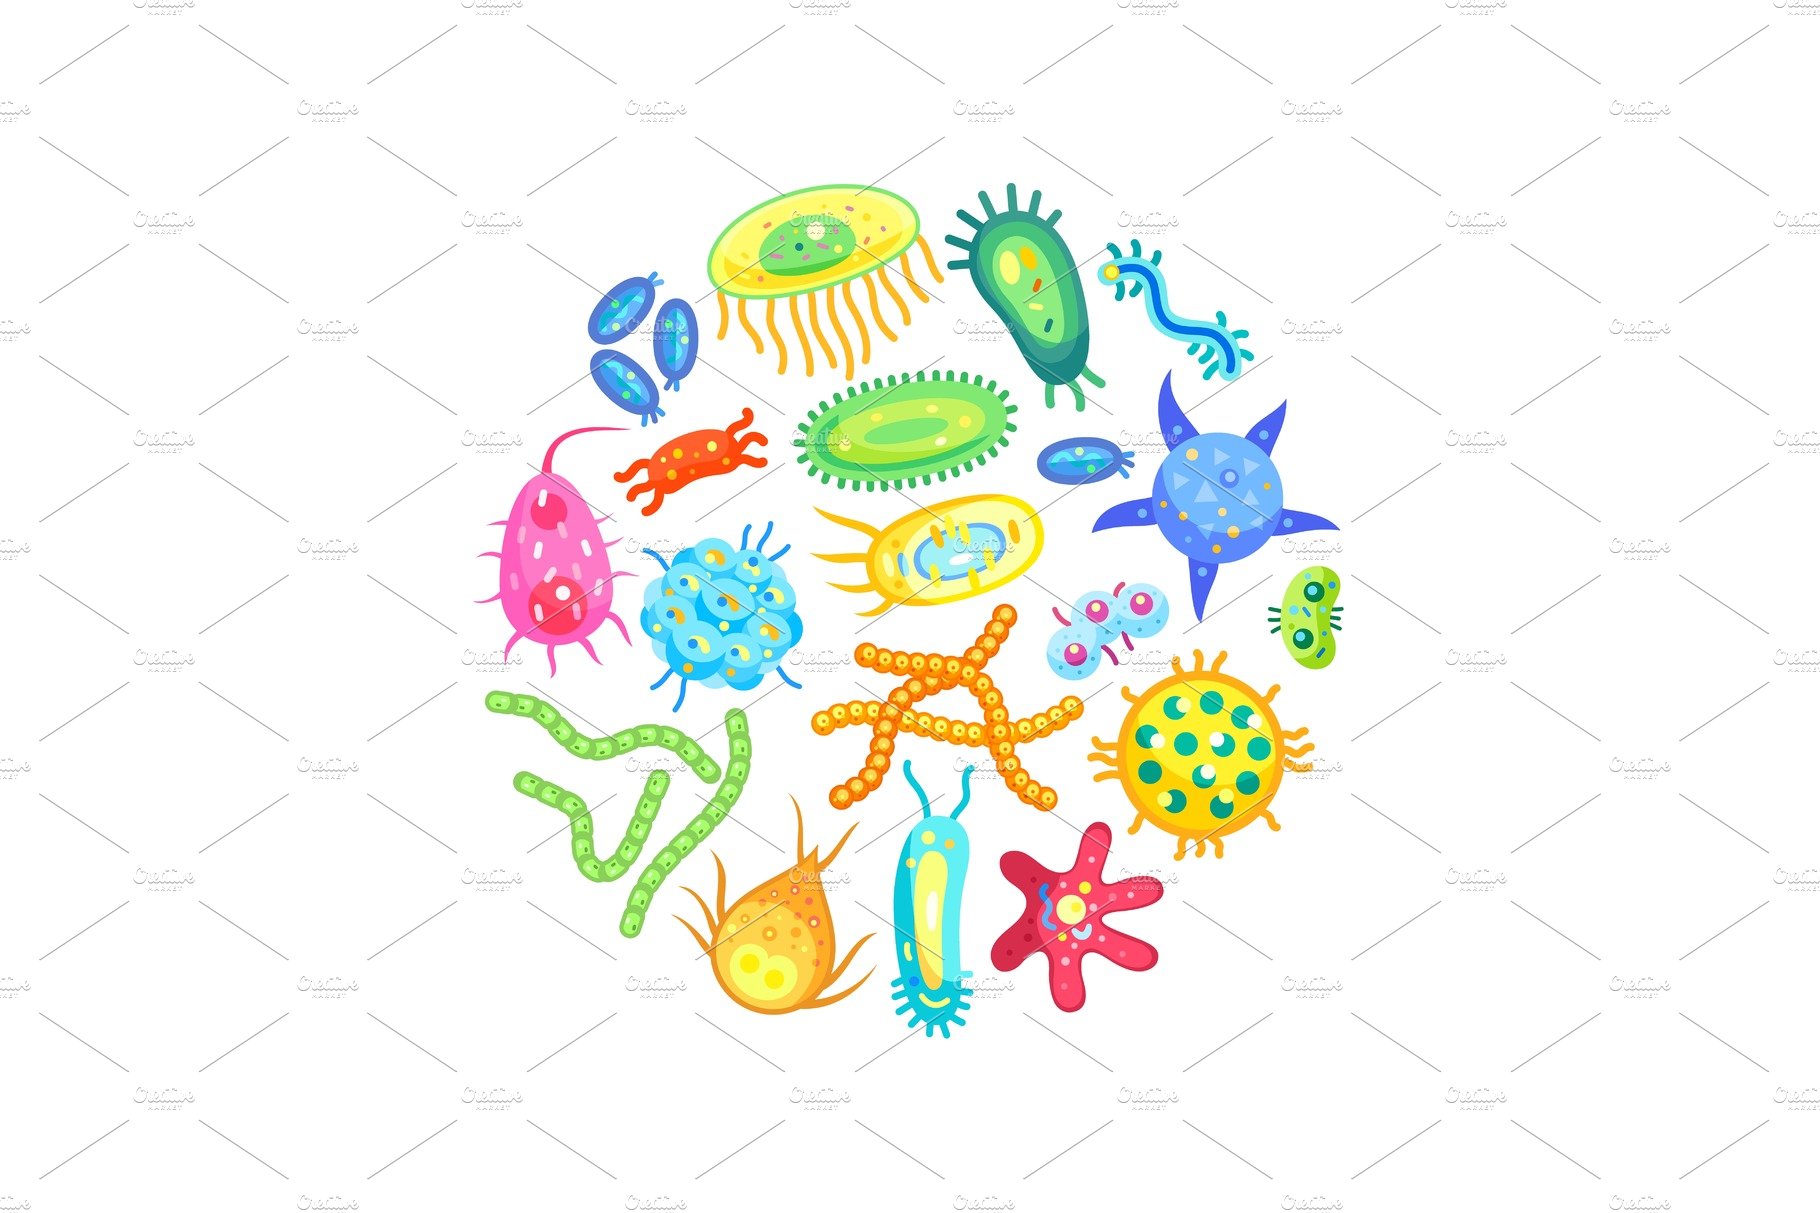 Microbes Bacteria and Viruses cover image.